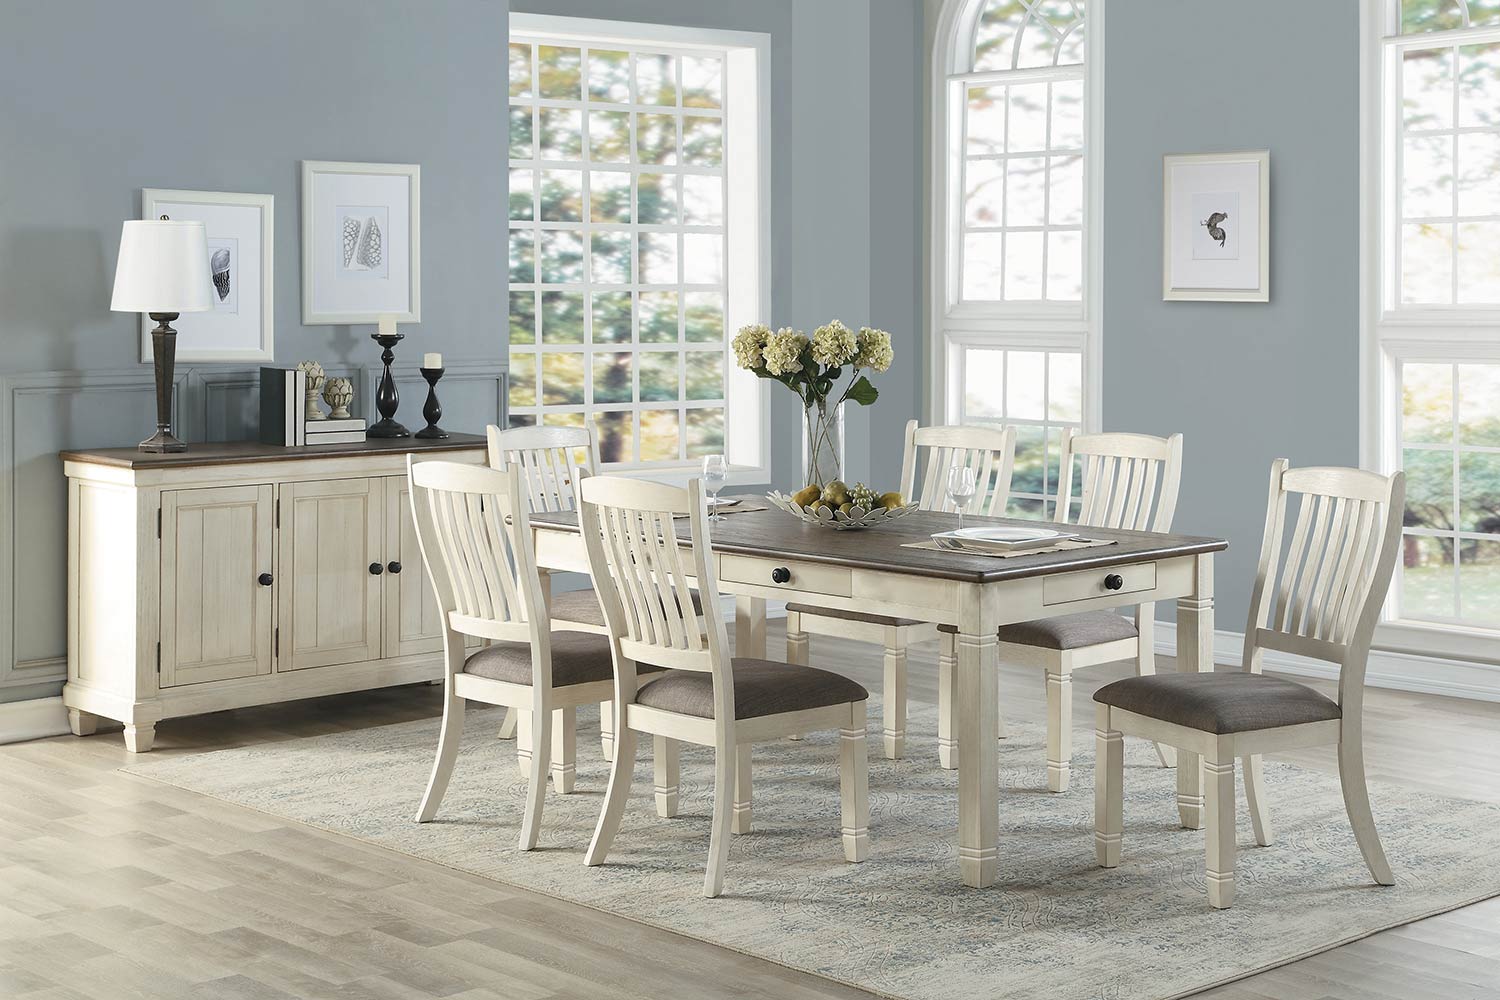 Homelegance Granby Dining Set - Antique White - Rosy Brown